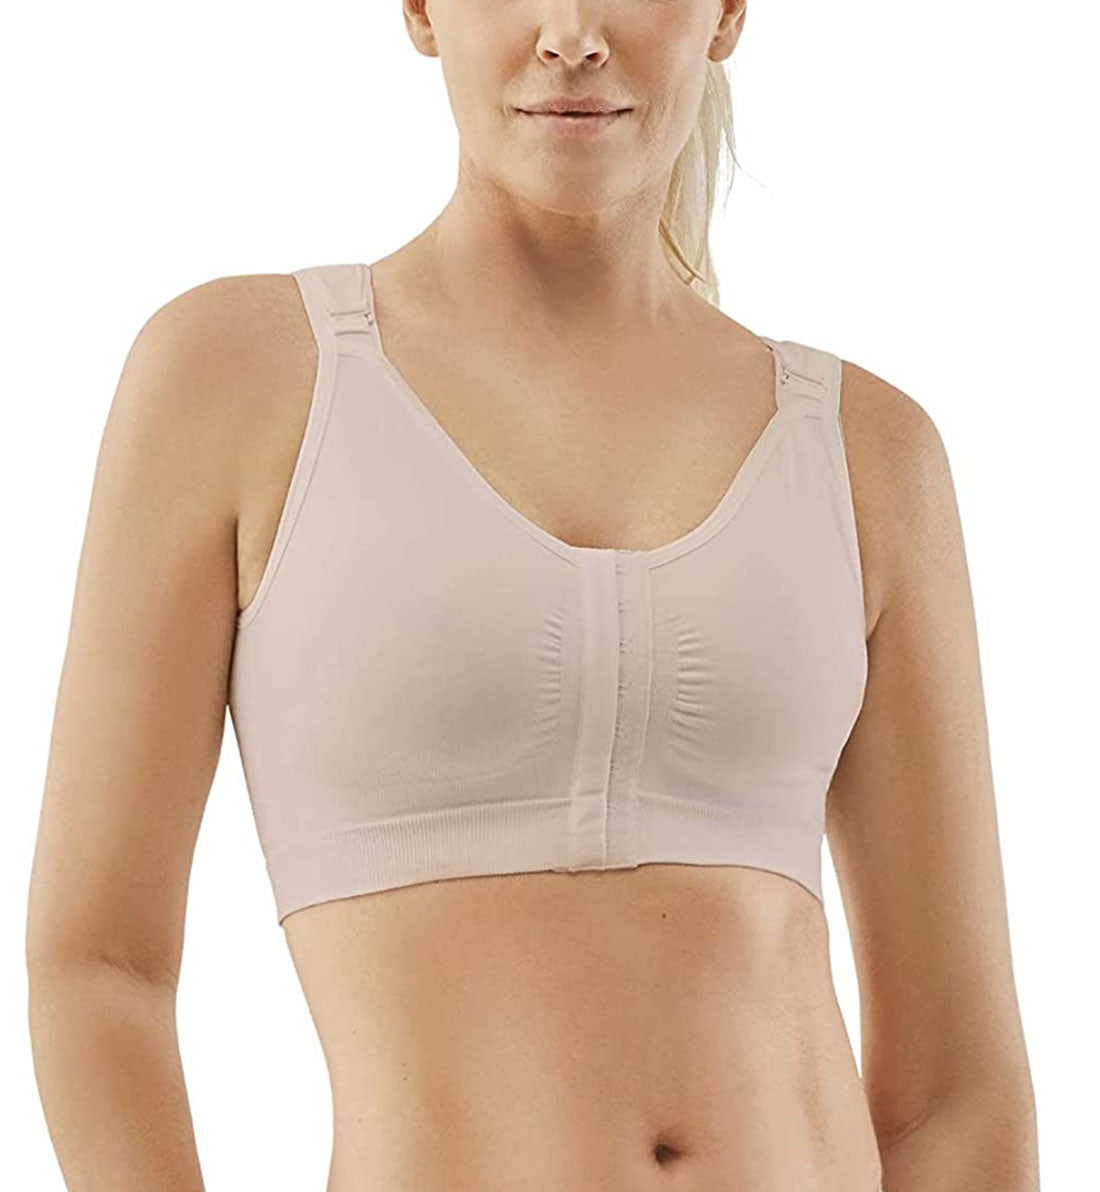 Carefix Bree Post-Op Wire Free Front Close Recovery Bra (3831),Small,Tan - Nude,Small